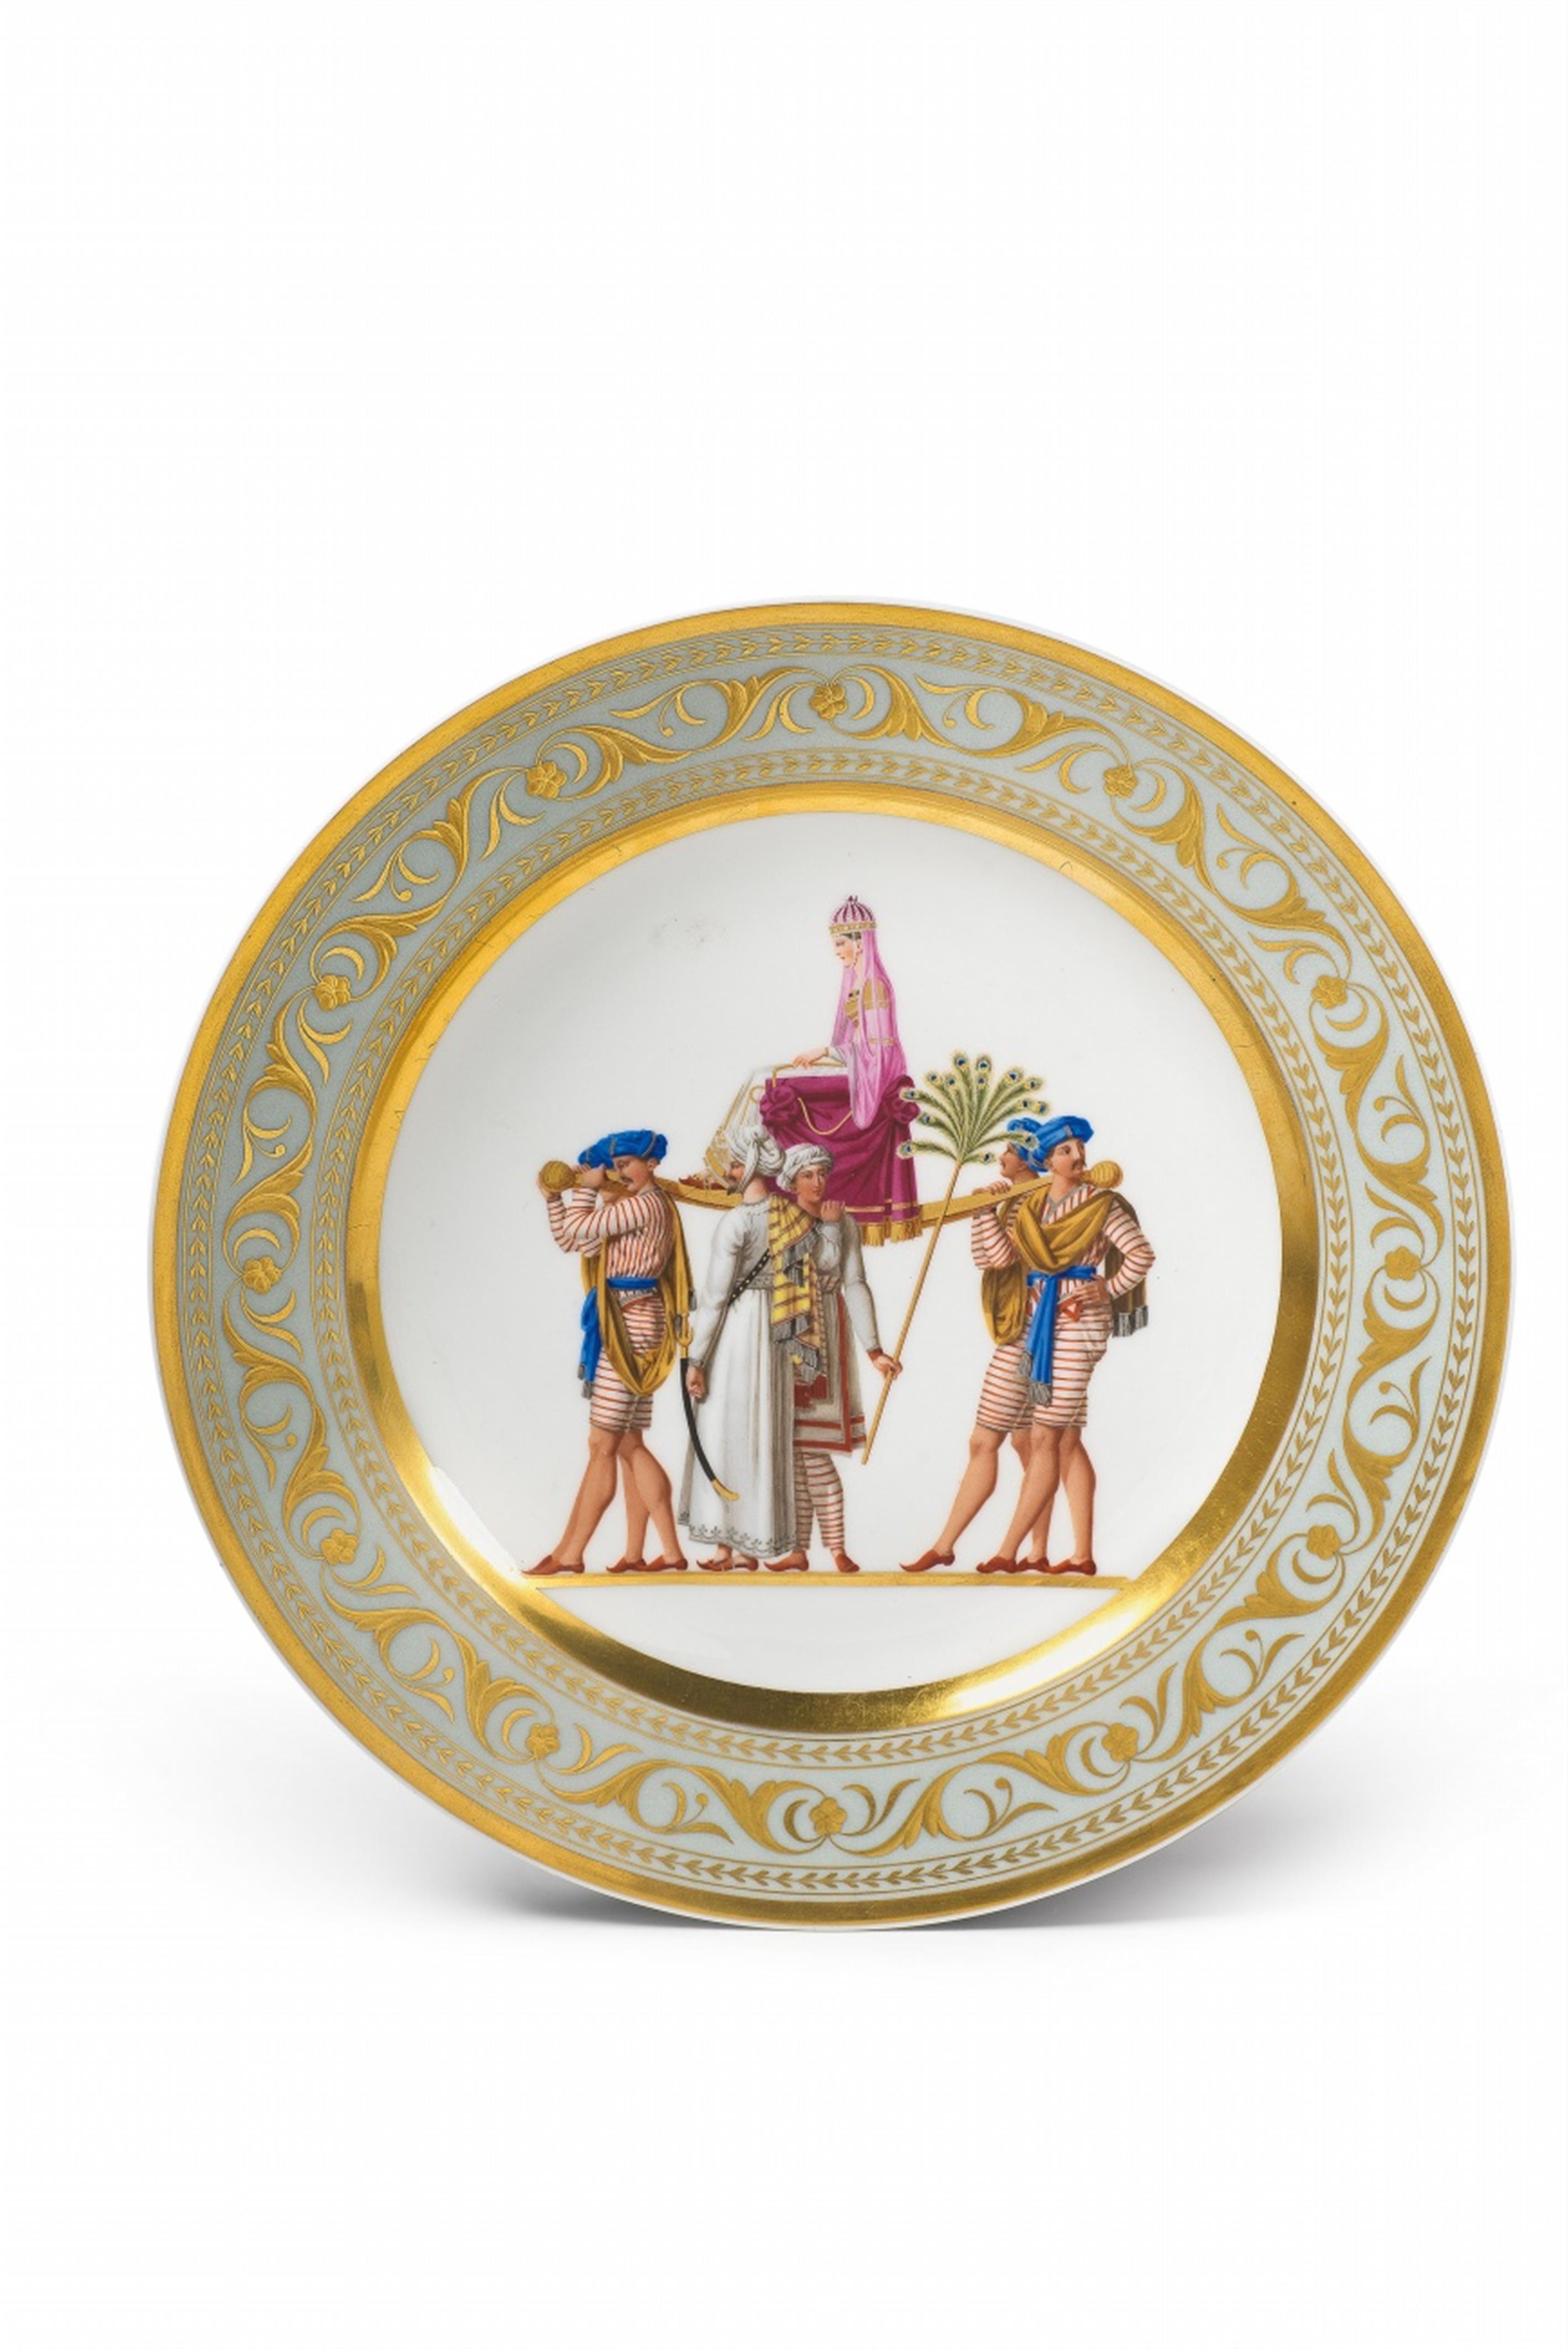 A Berlin KPM porcelain plate with a scene from Lalla Rûkh - image-1